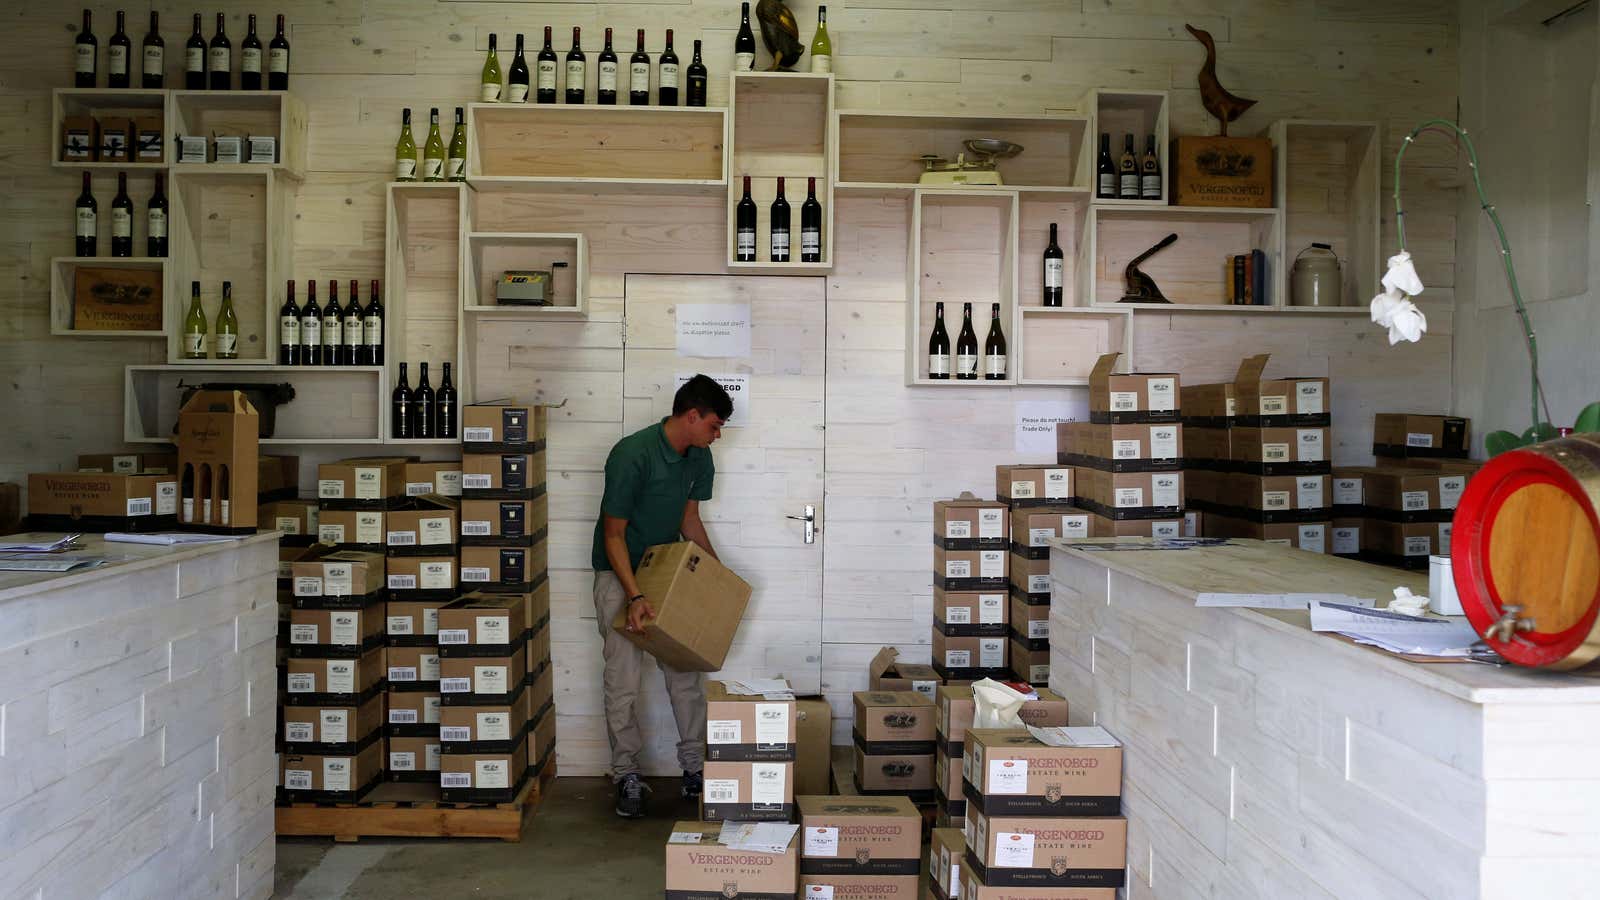 A farmworker stacks boxes of wine for sale at the Vergenoegd wine estate near Cape Town.